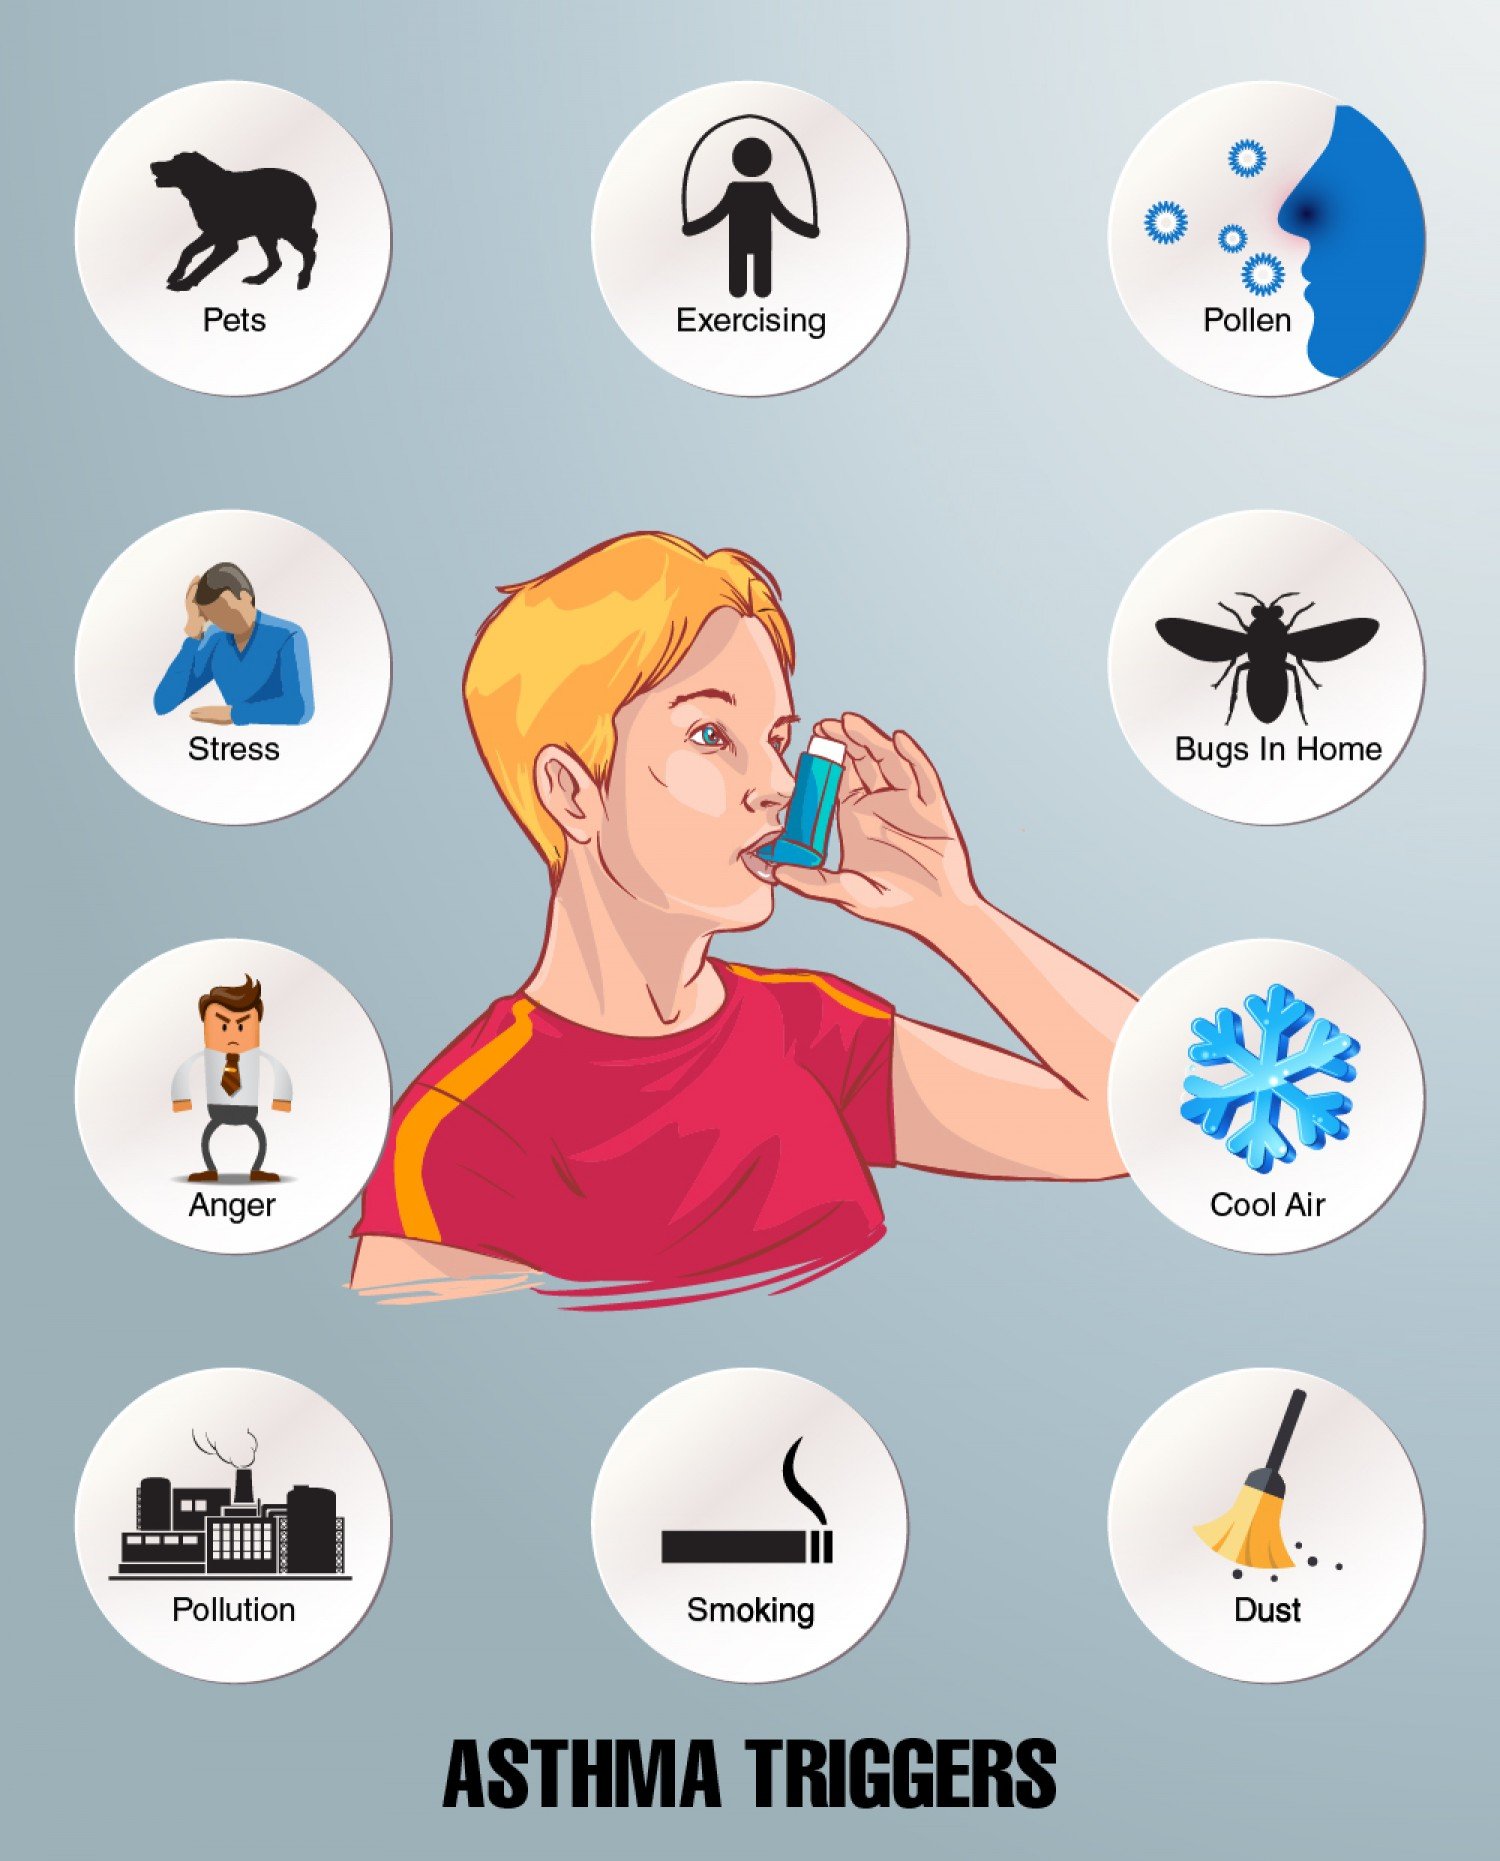 6 Triggers That Increase Chances Of An Asthma Attack